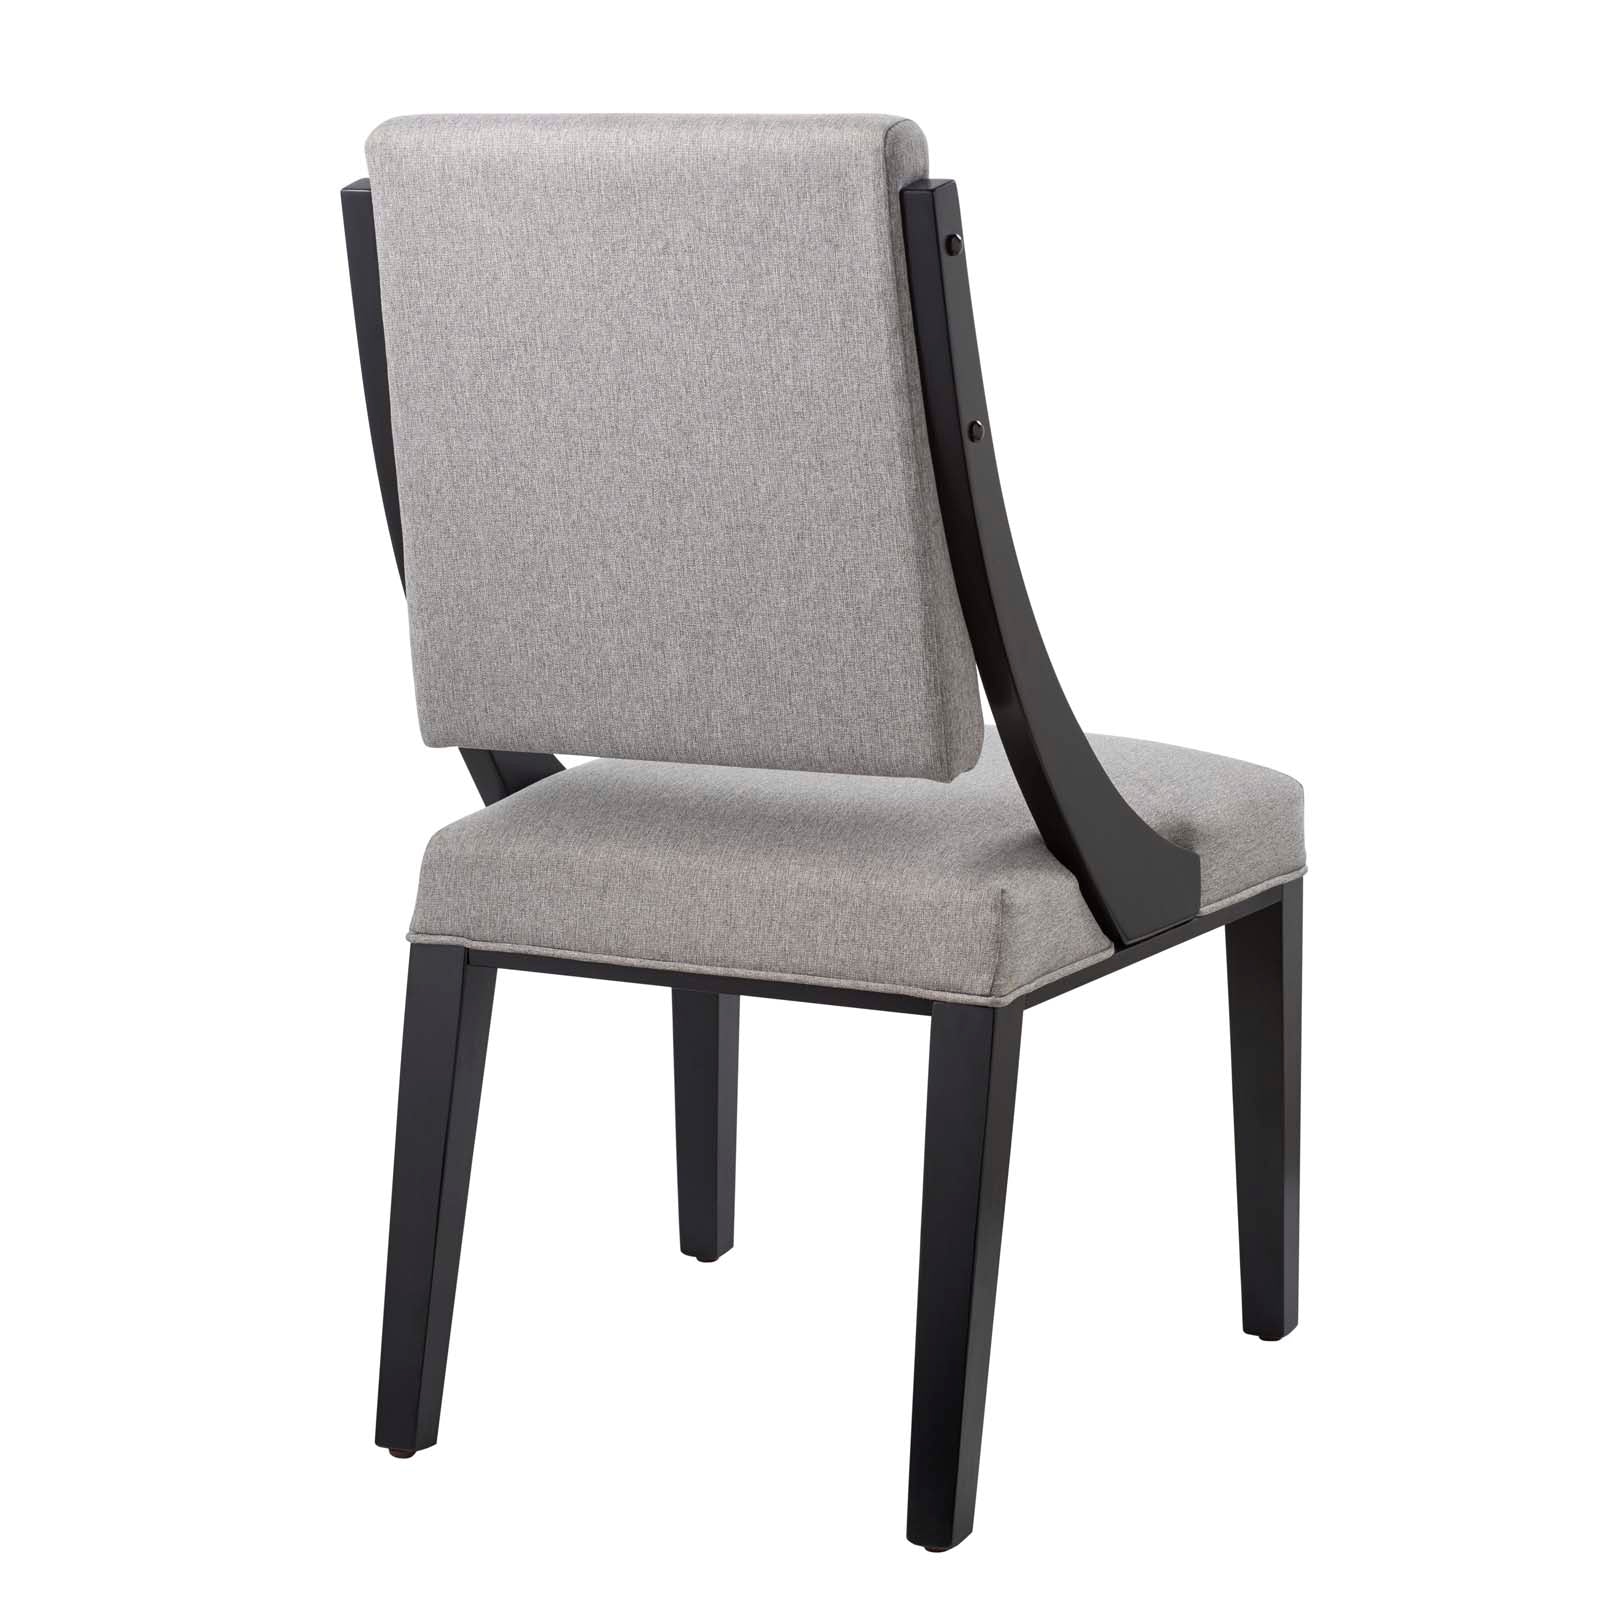 Cambridge Upholstered Fabric Dining Chairs - Set of 2 - East Shore Modern Home Furnishings